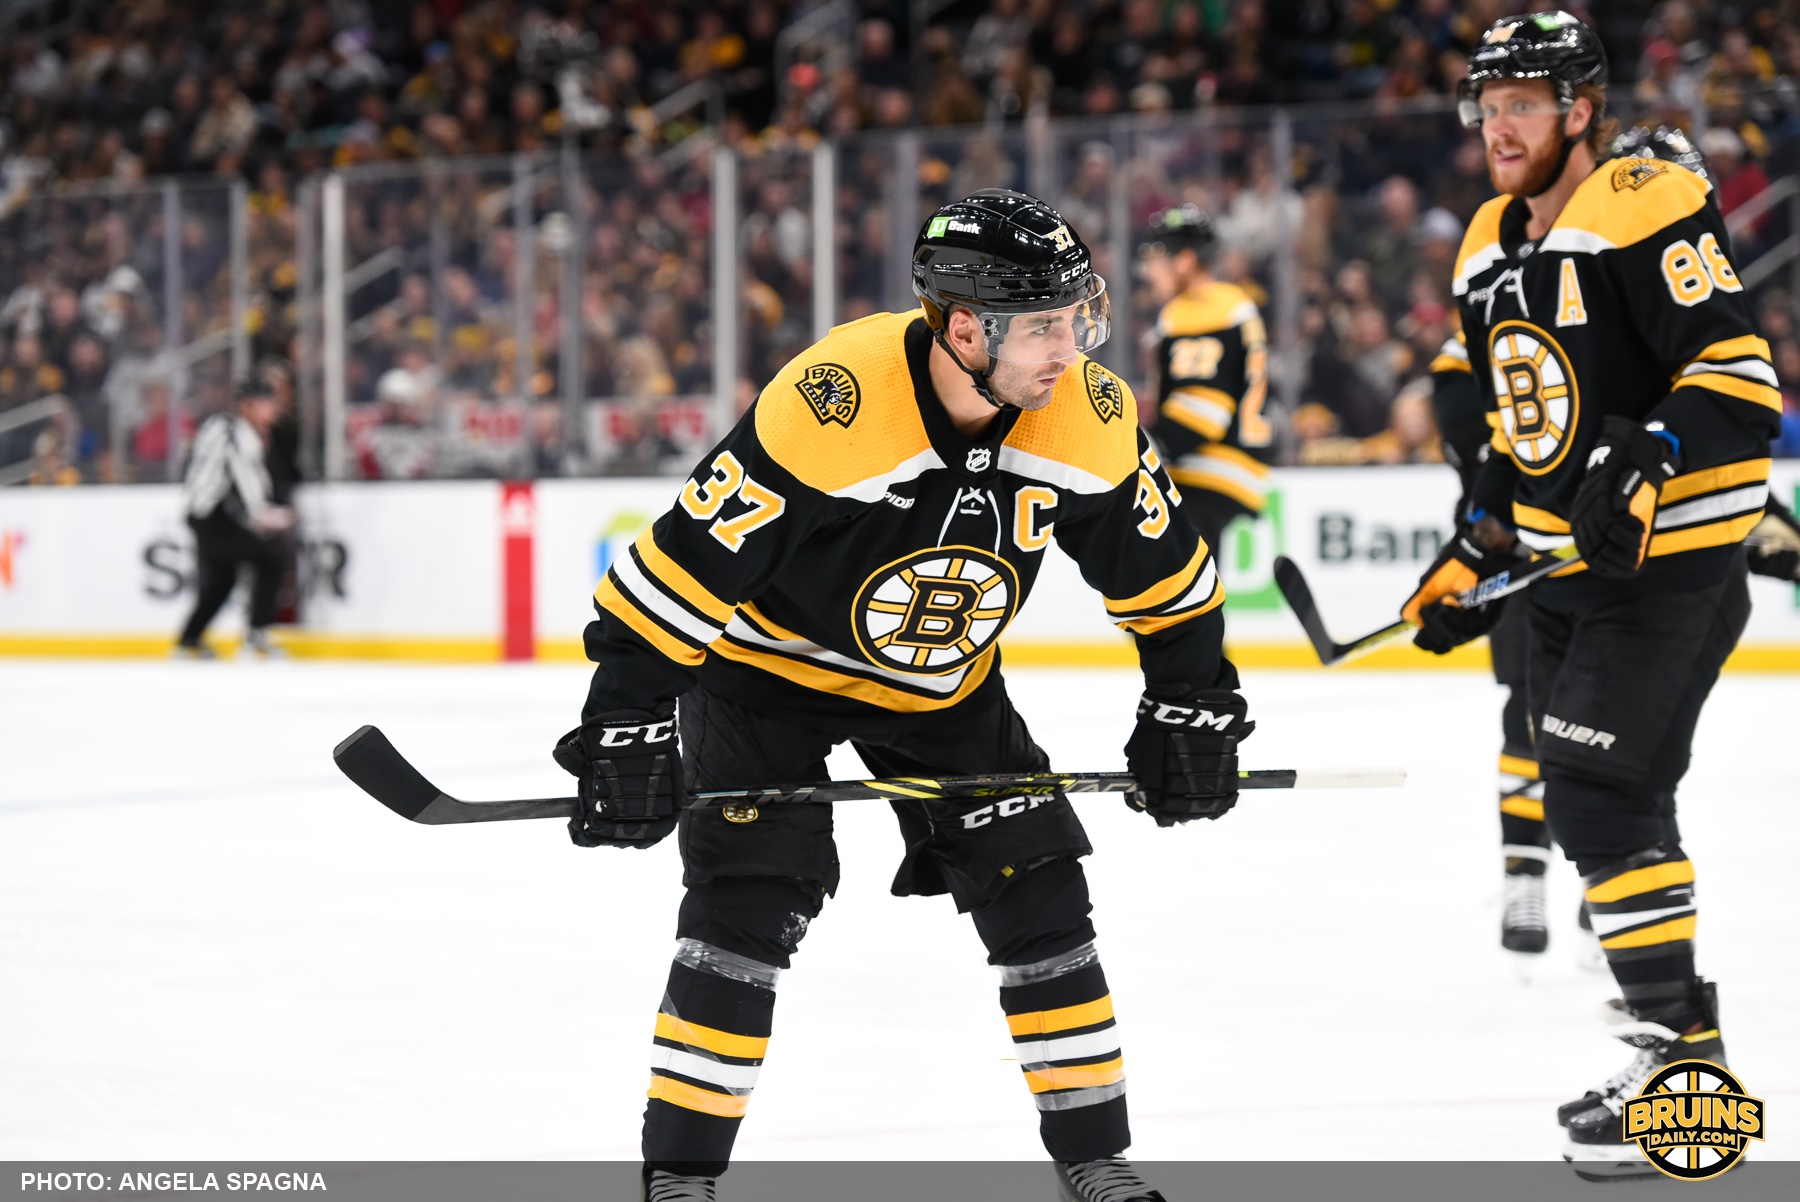 3 takeaways from the Boston Bruins, Pittsburgh Penguins Winter Classic